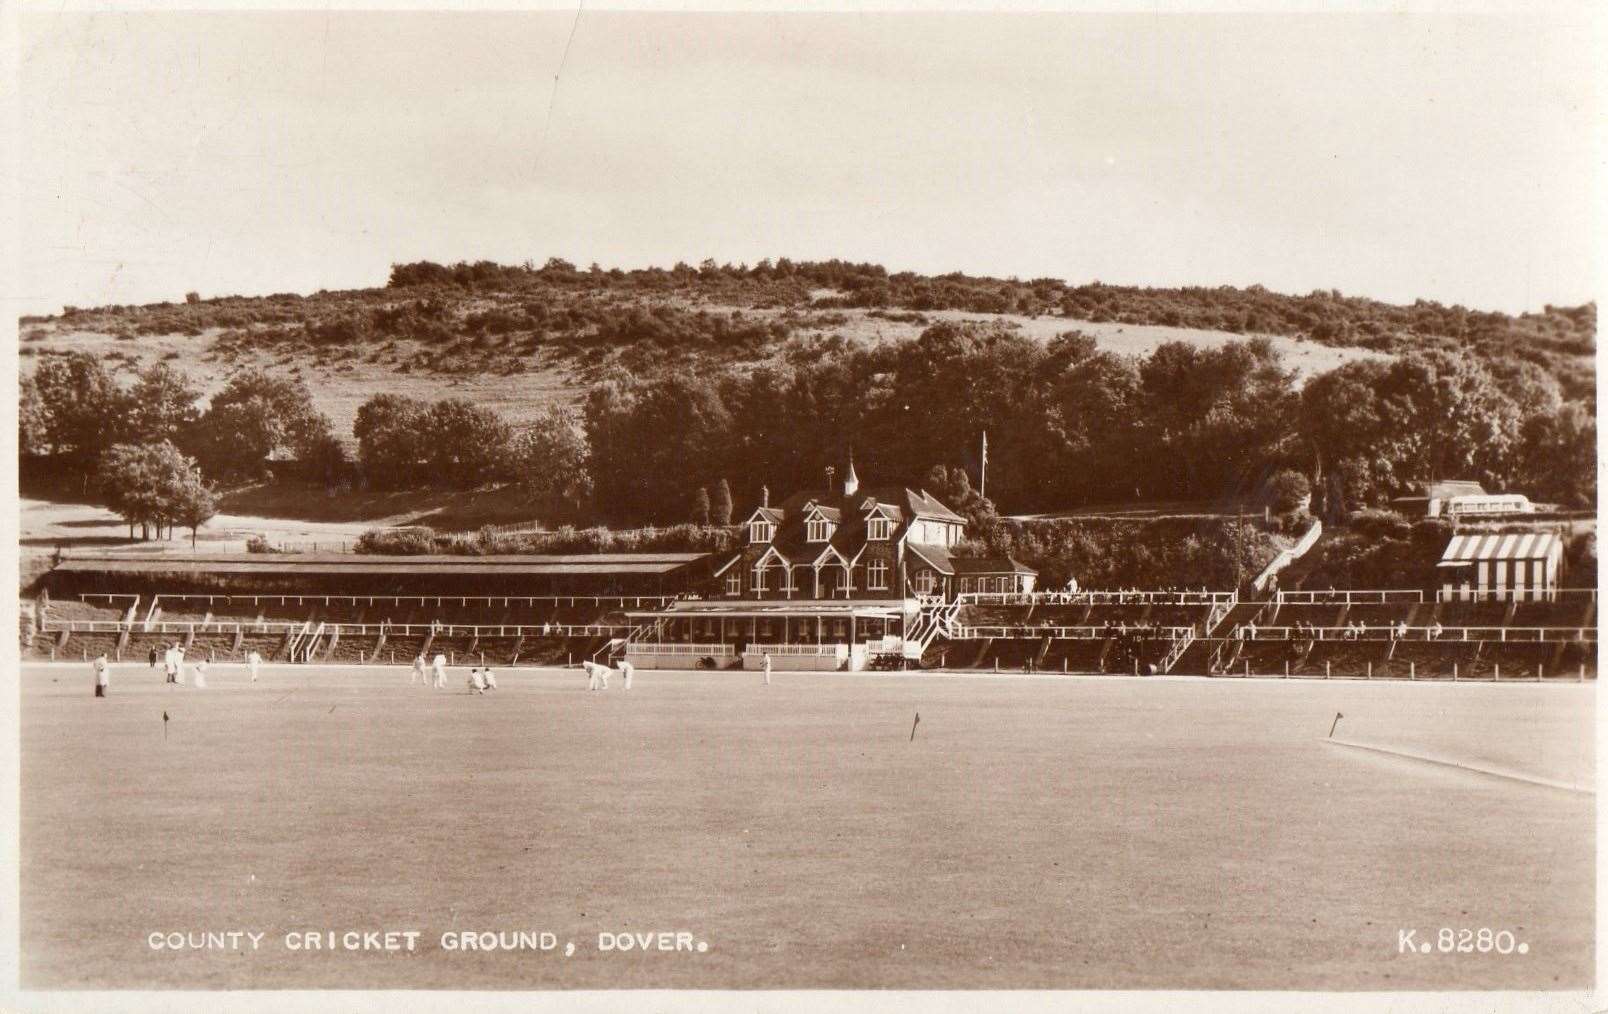 Dover cricket ground pictured in the 1950s. Picture: Howard Milton Collection/Kent County Cricket Grounds by Howard Milton and Peter Francis